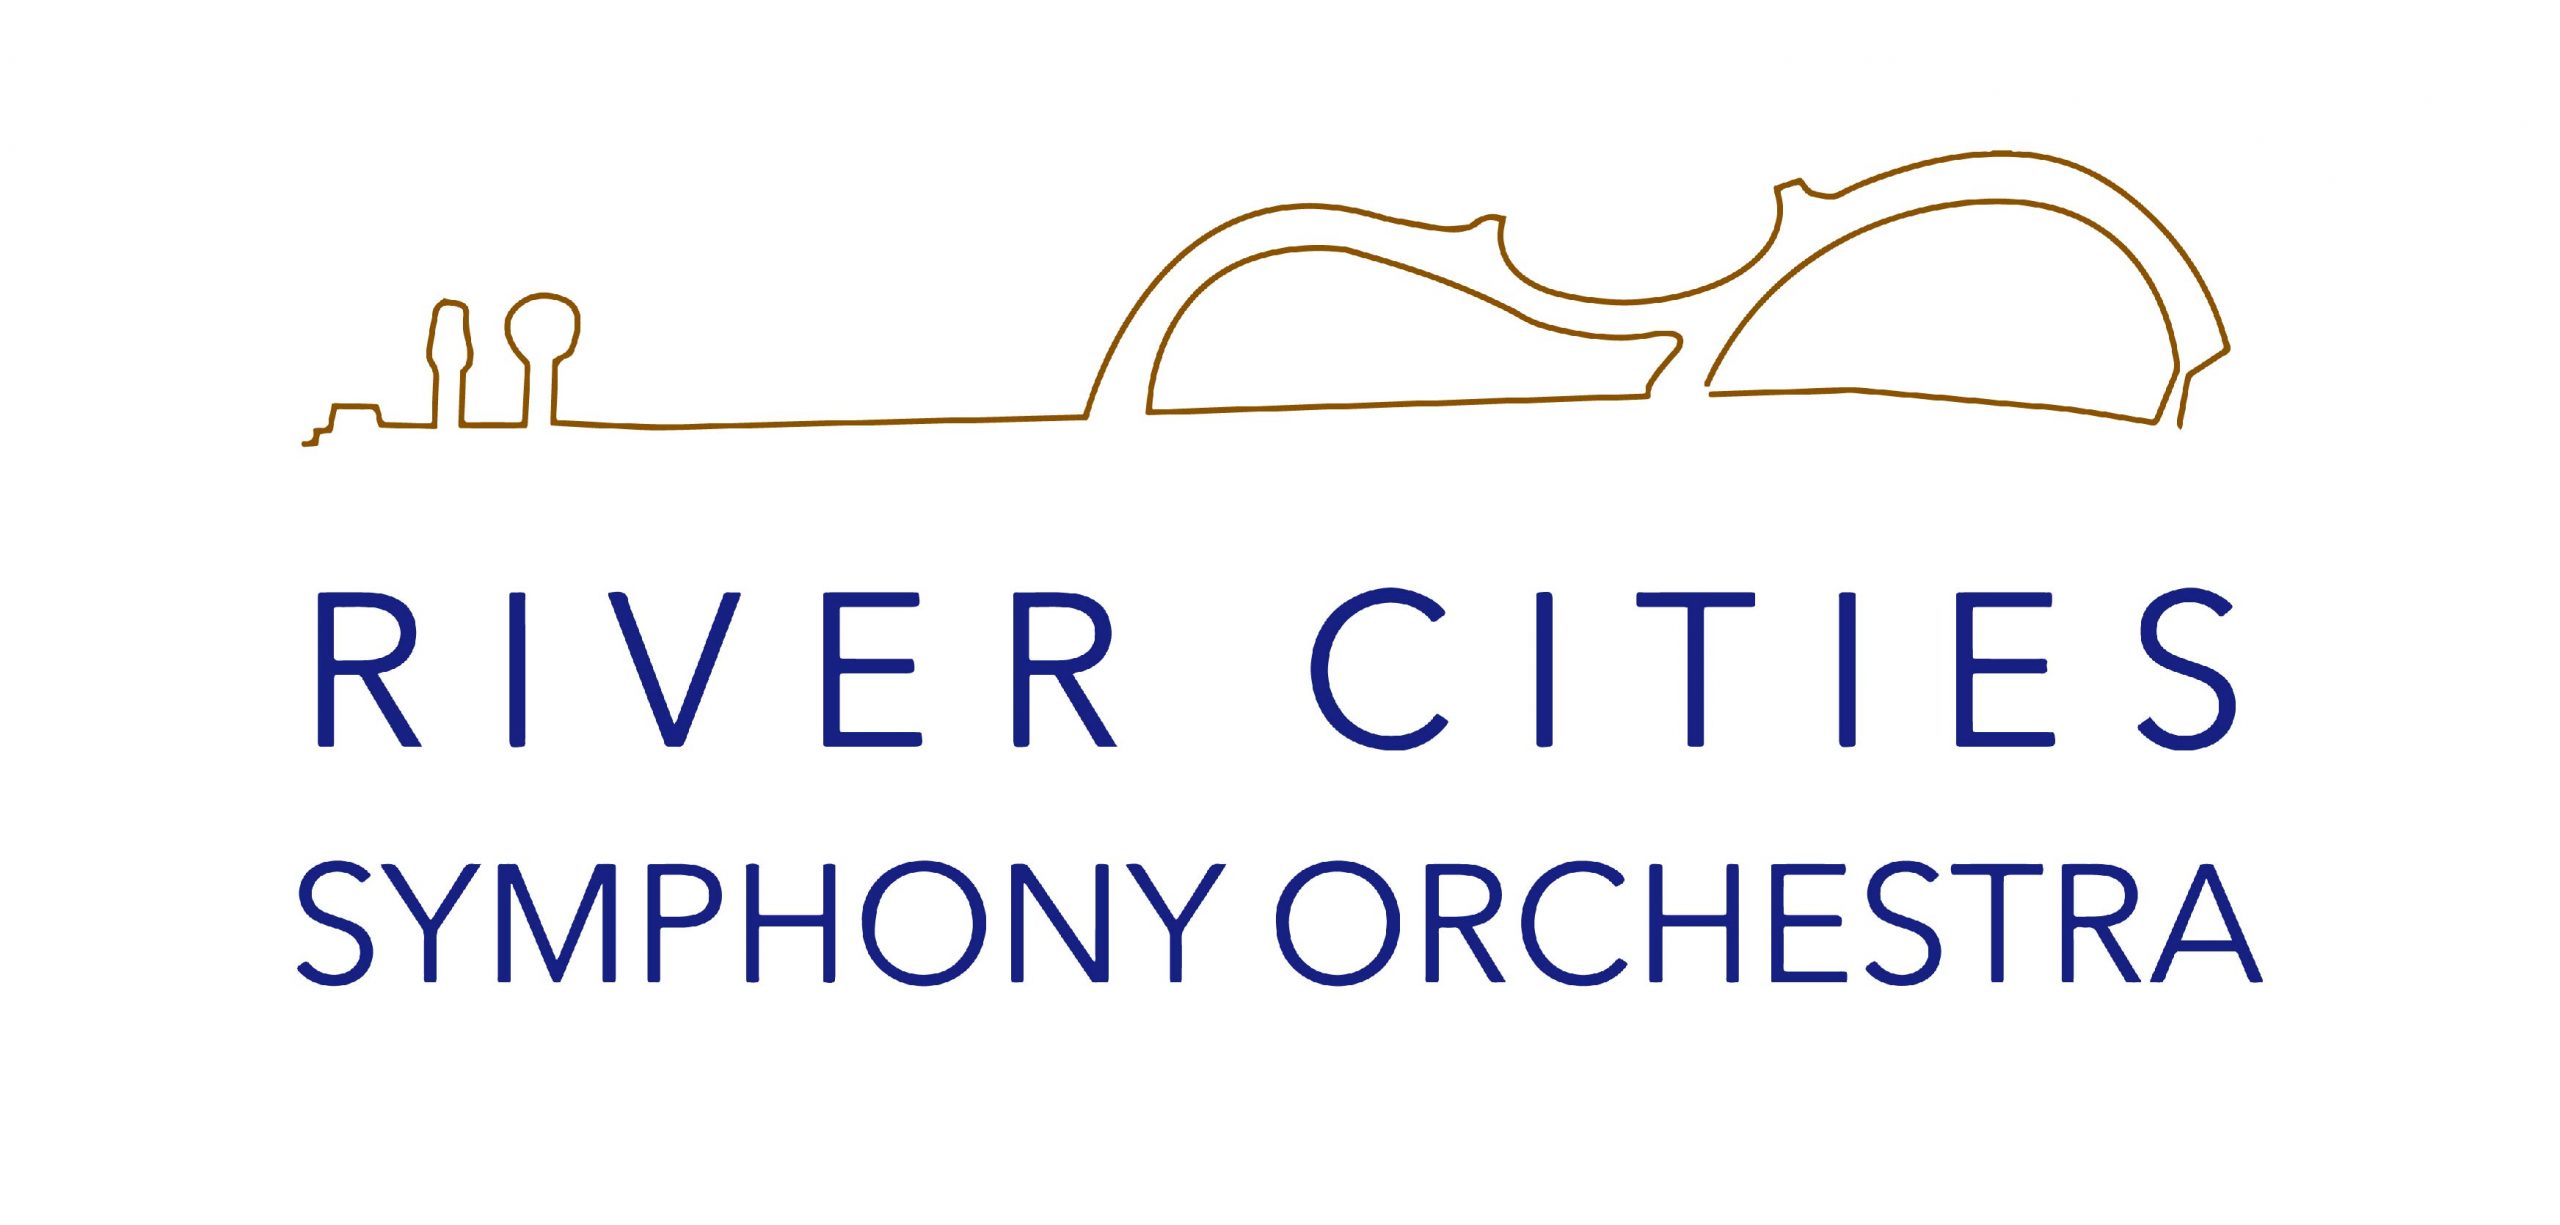 A logo that reads River Cities Symphony Orchestra. The words appear on the bottom side in two horizontal rows underneath half of what looks like a violin.